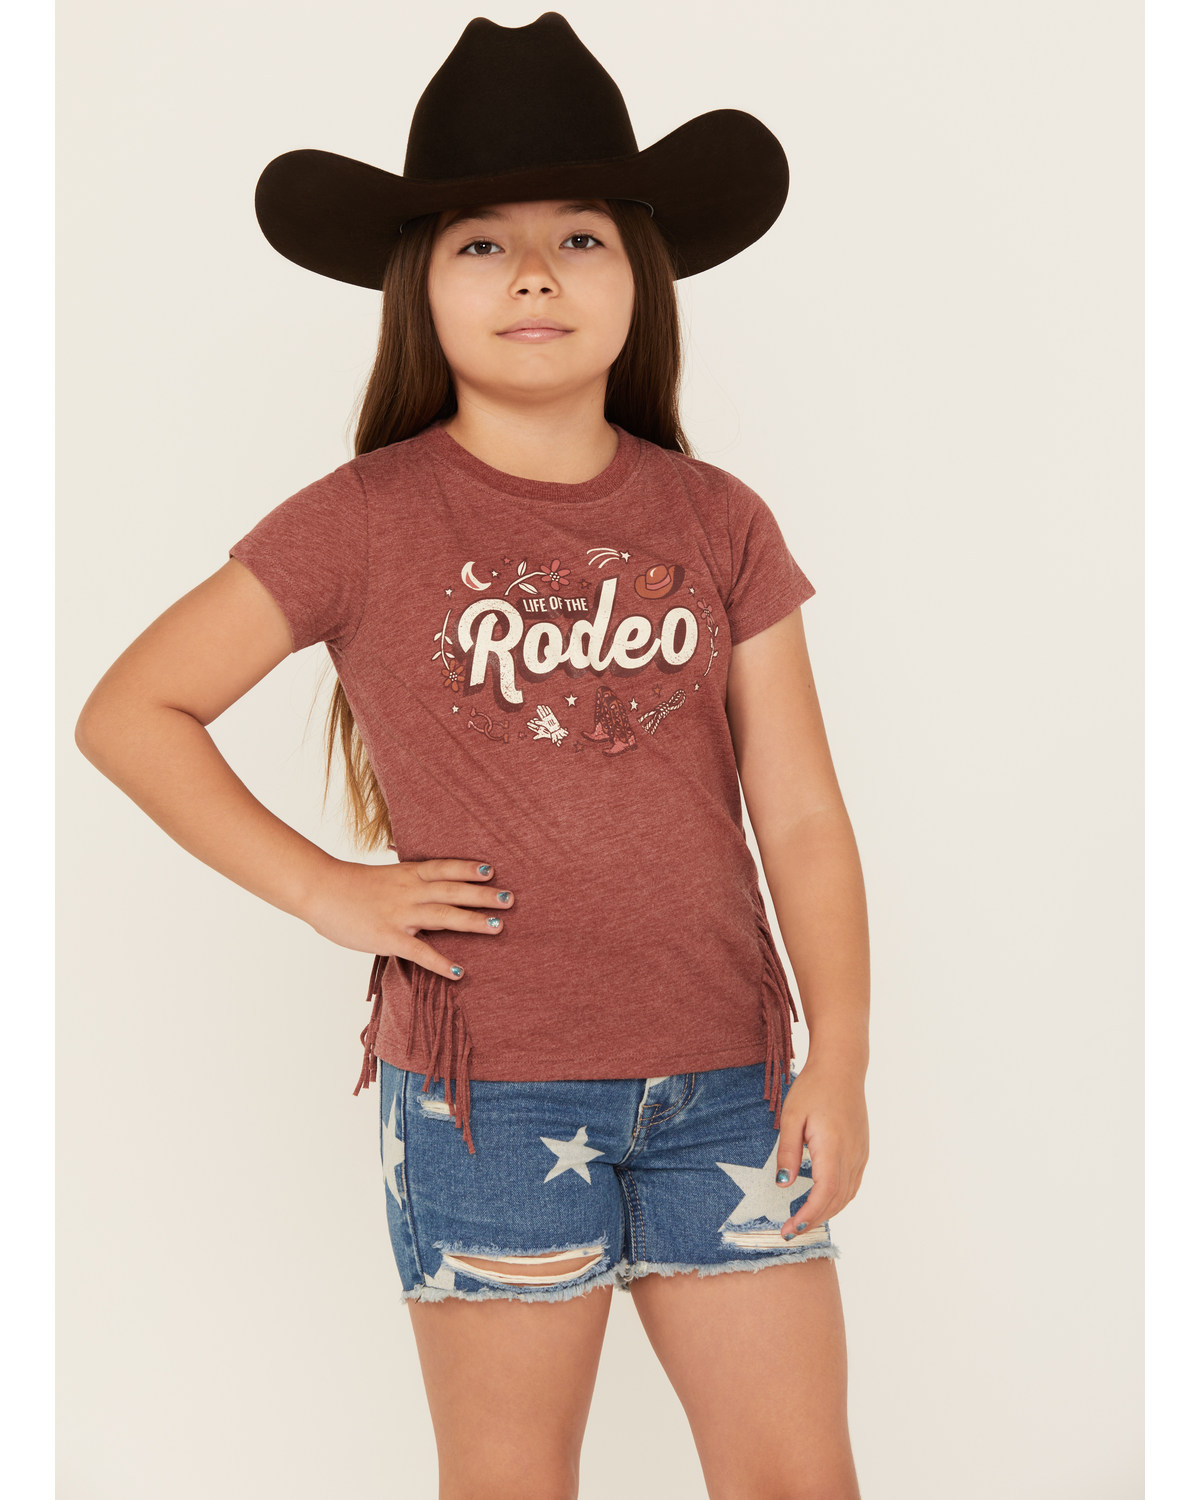 Shyanne Girls' Life of the Rodeo Short Sleeve Graphic Tee